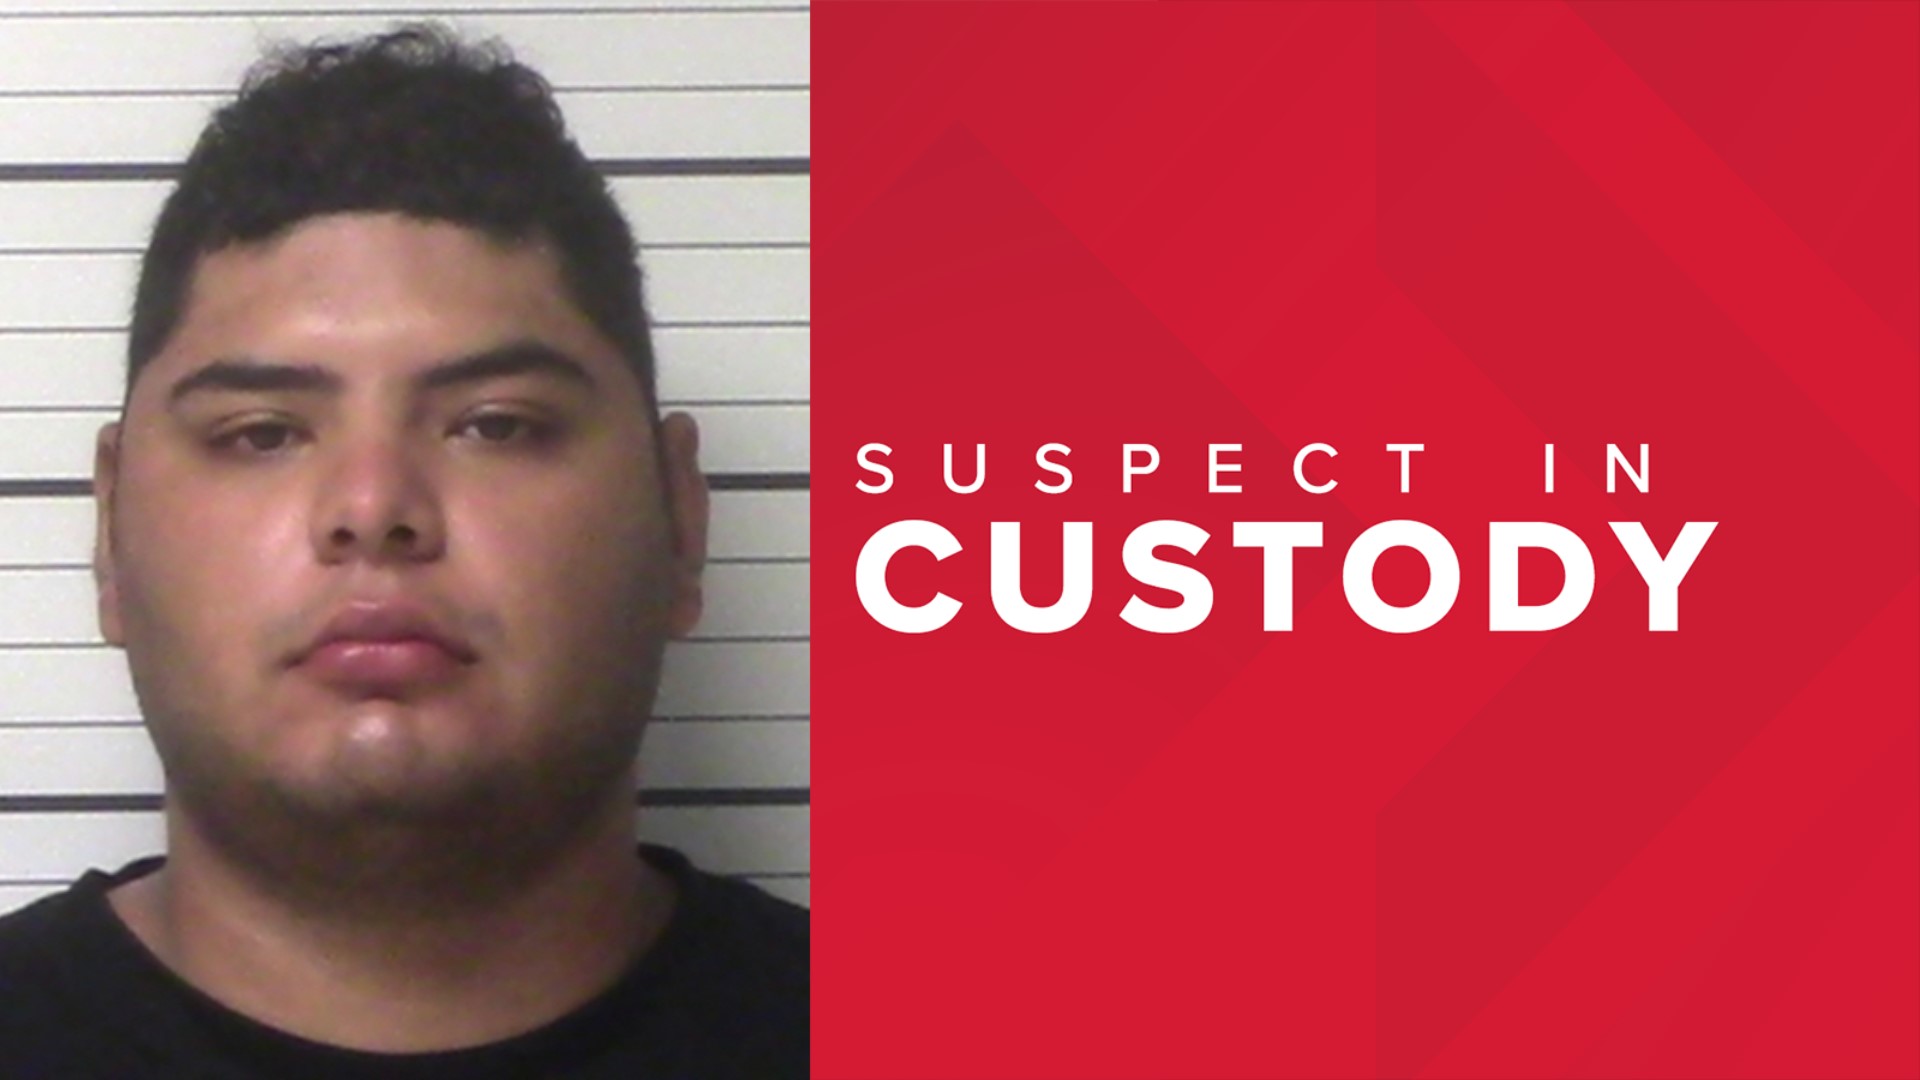 Police arrested Isaac Rodriguez Barboza, Jr., 23. He’s being charged with intoxication assault with a vehicle. The little girl was pinned under the pickup truck.